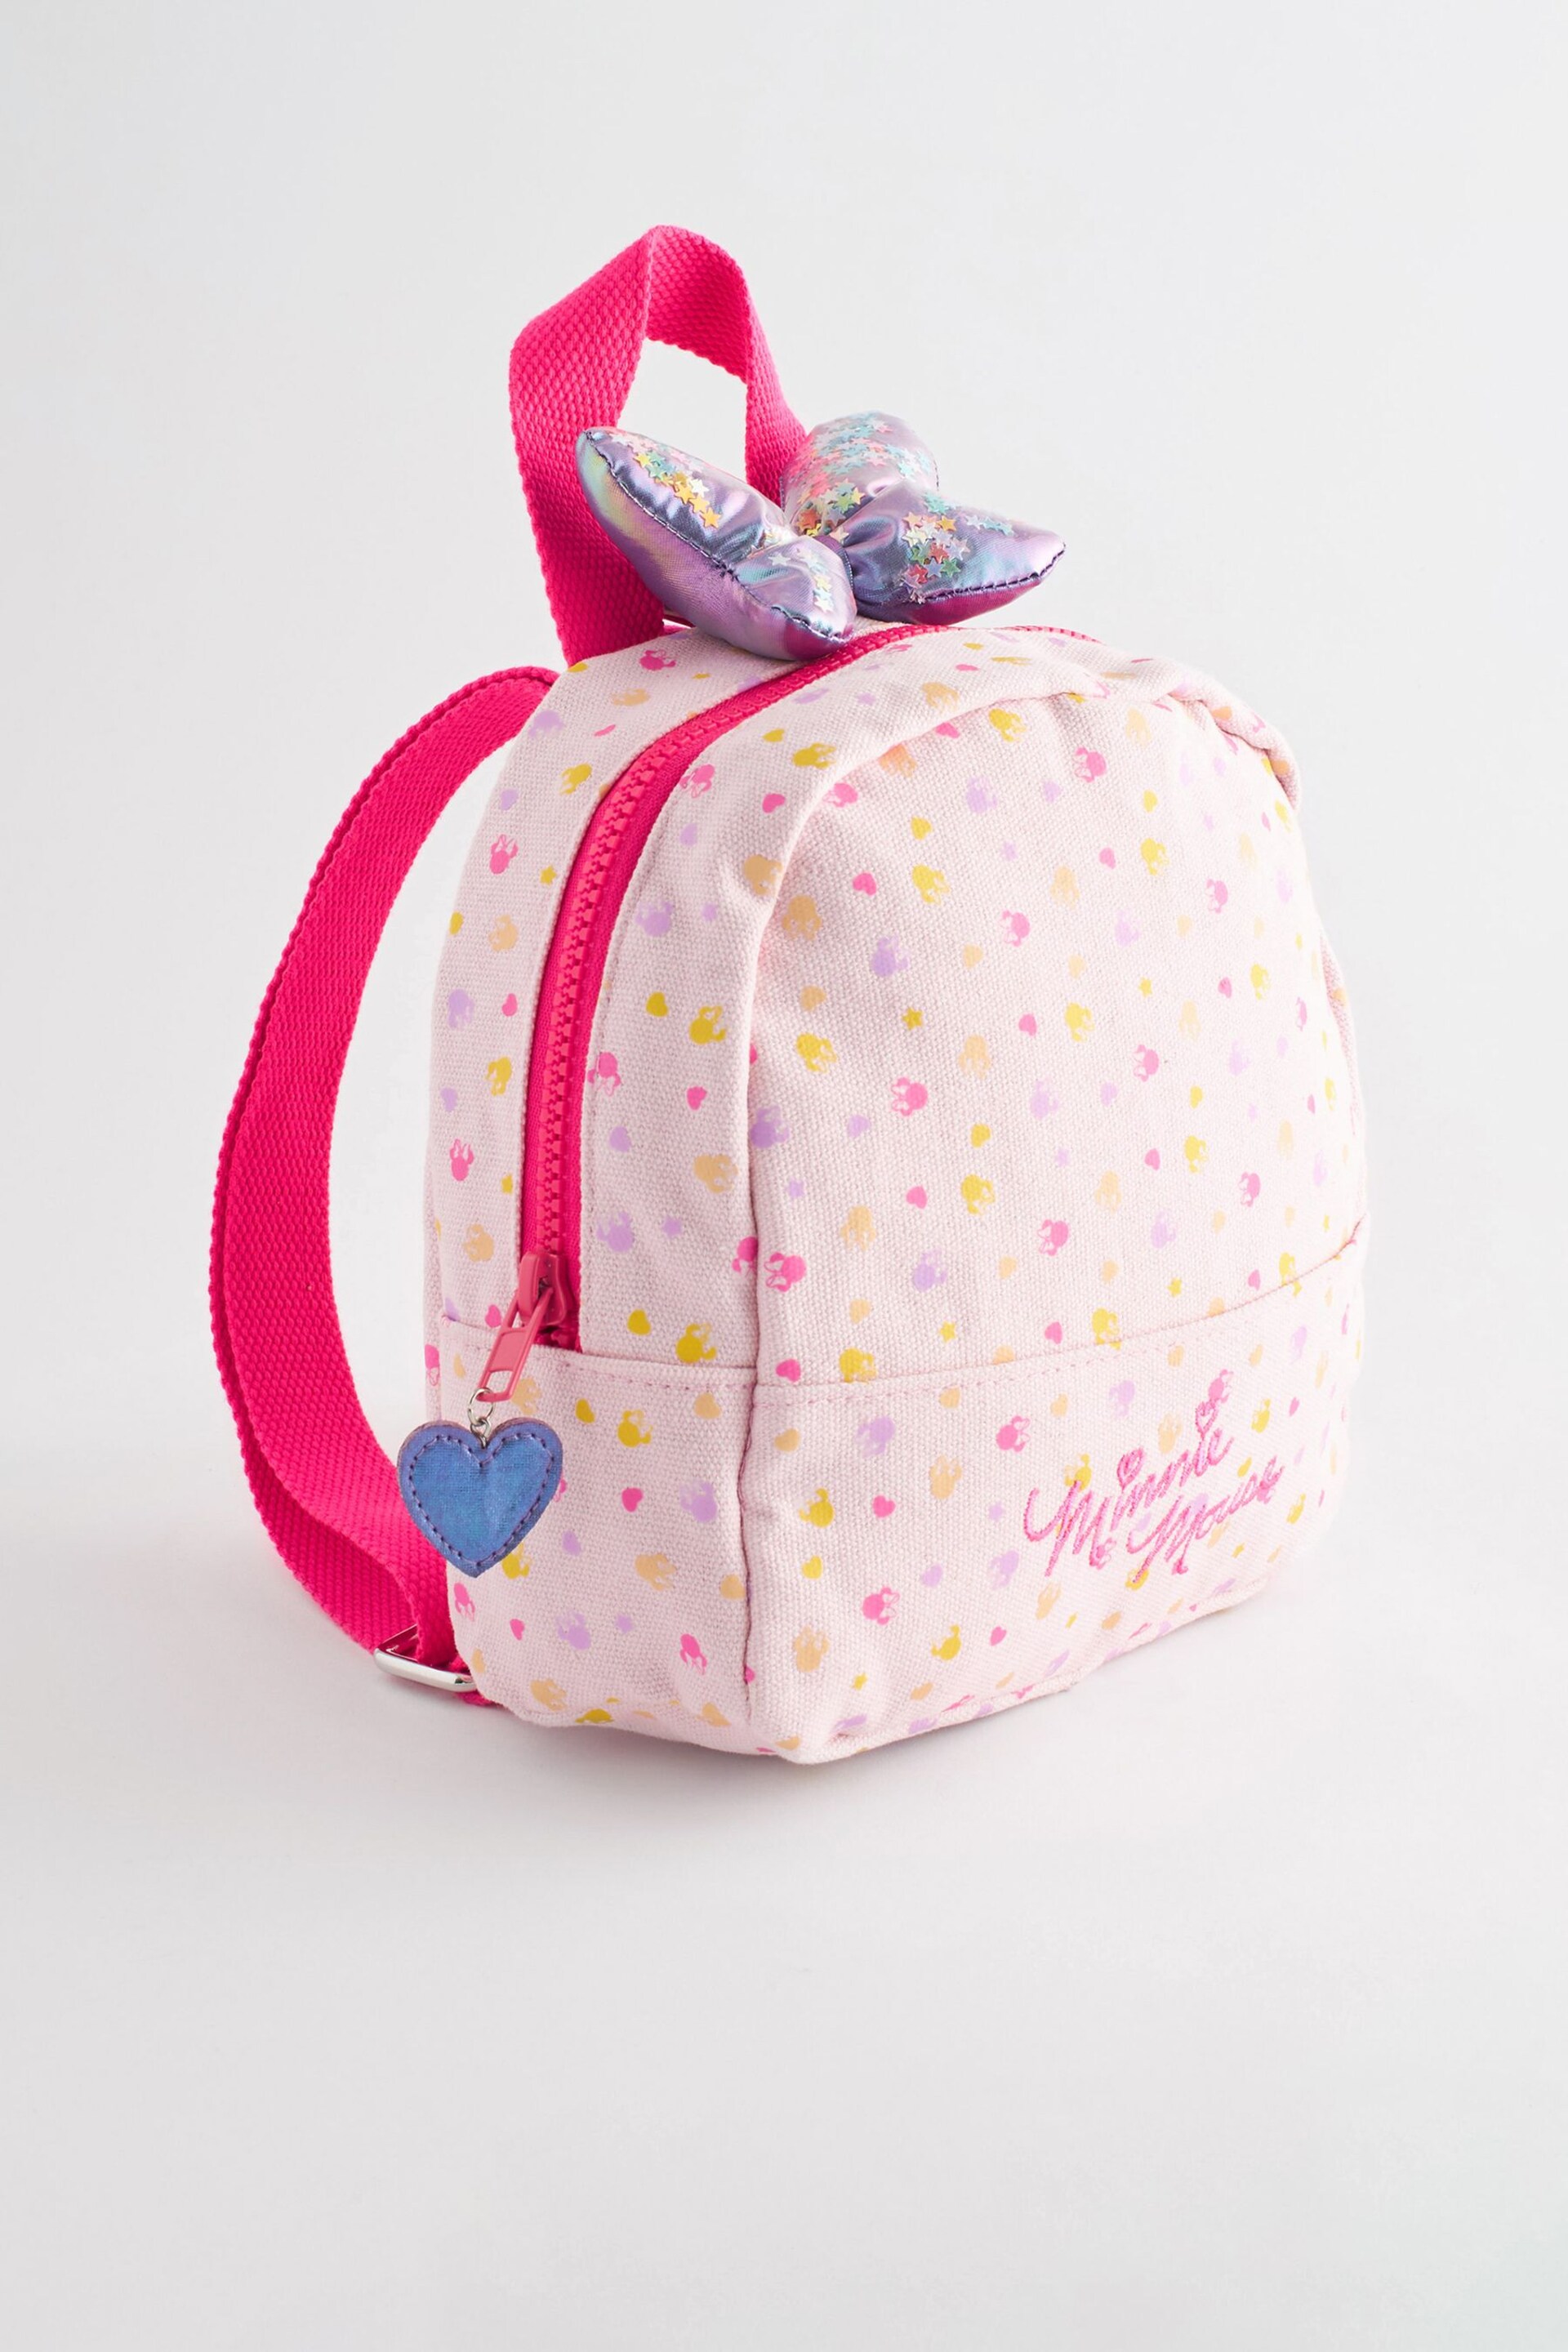 Pink Minnie Mouse Rucksack - Image 1 of 5